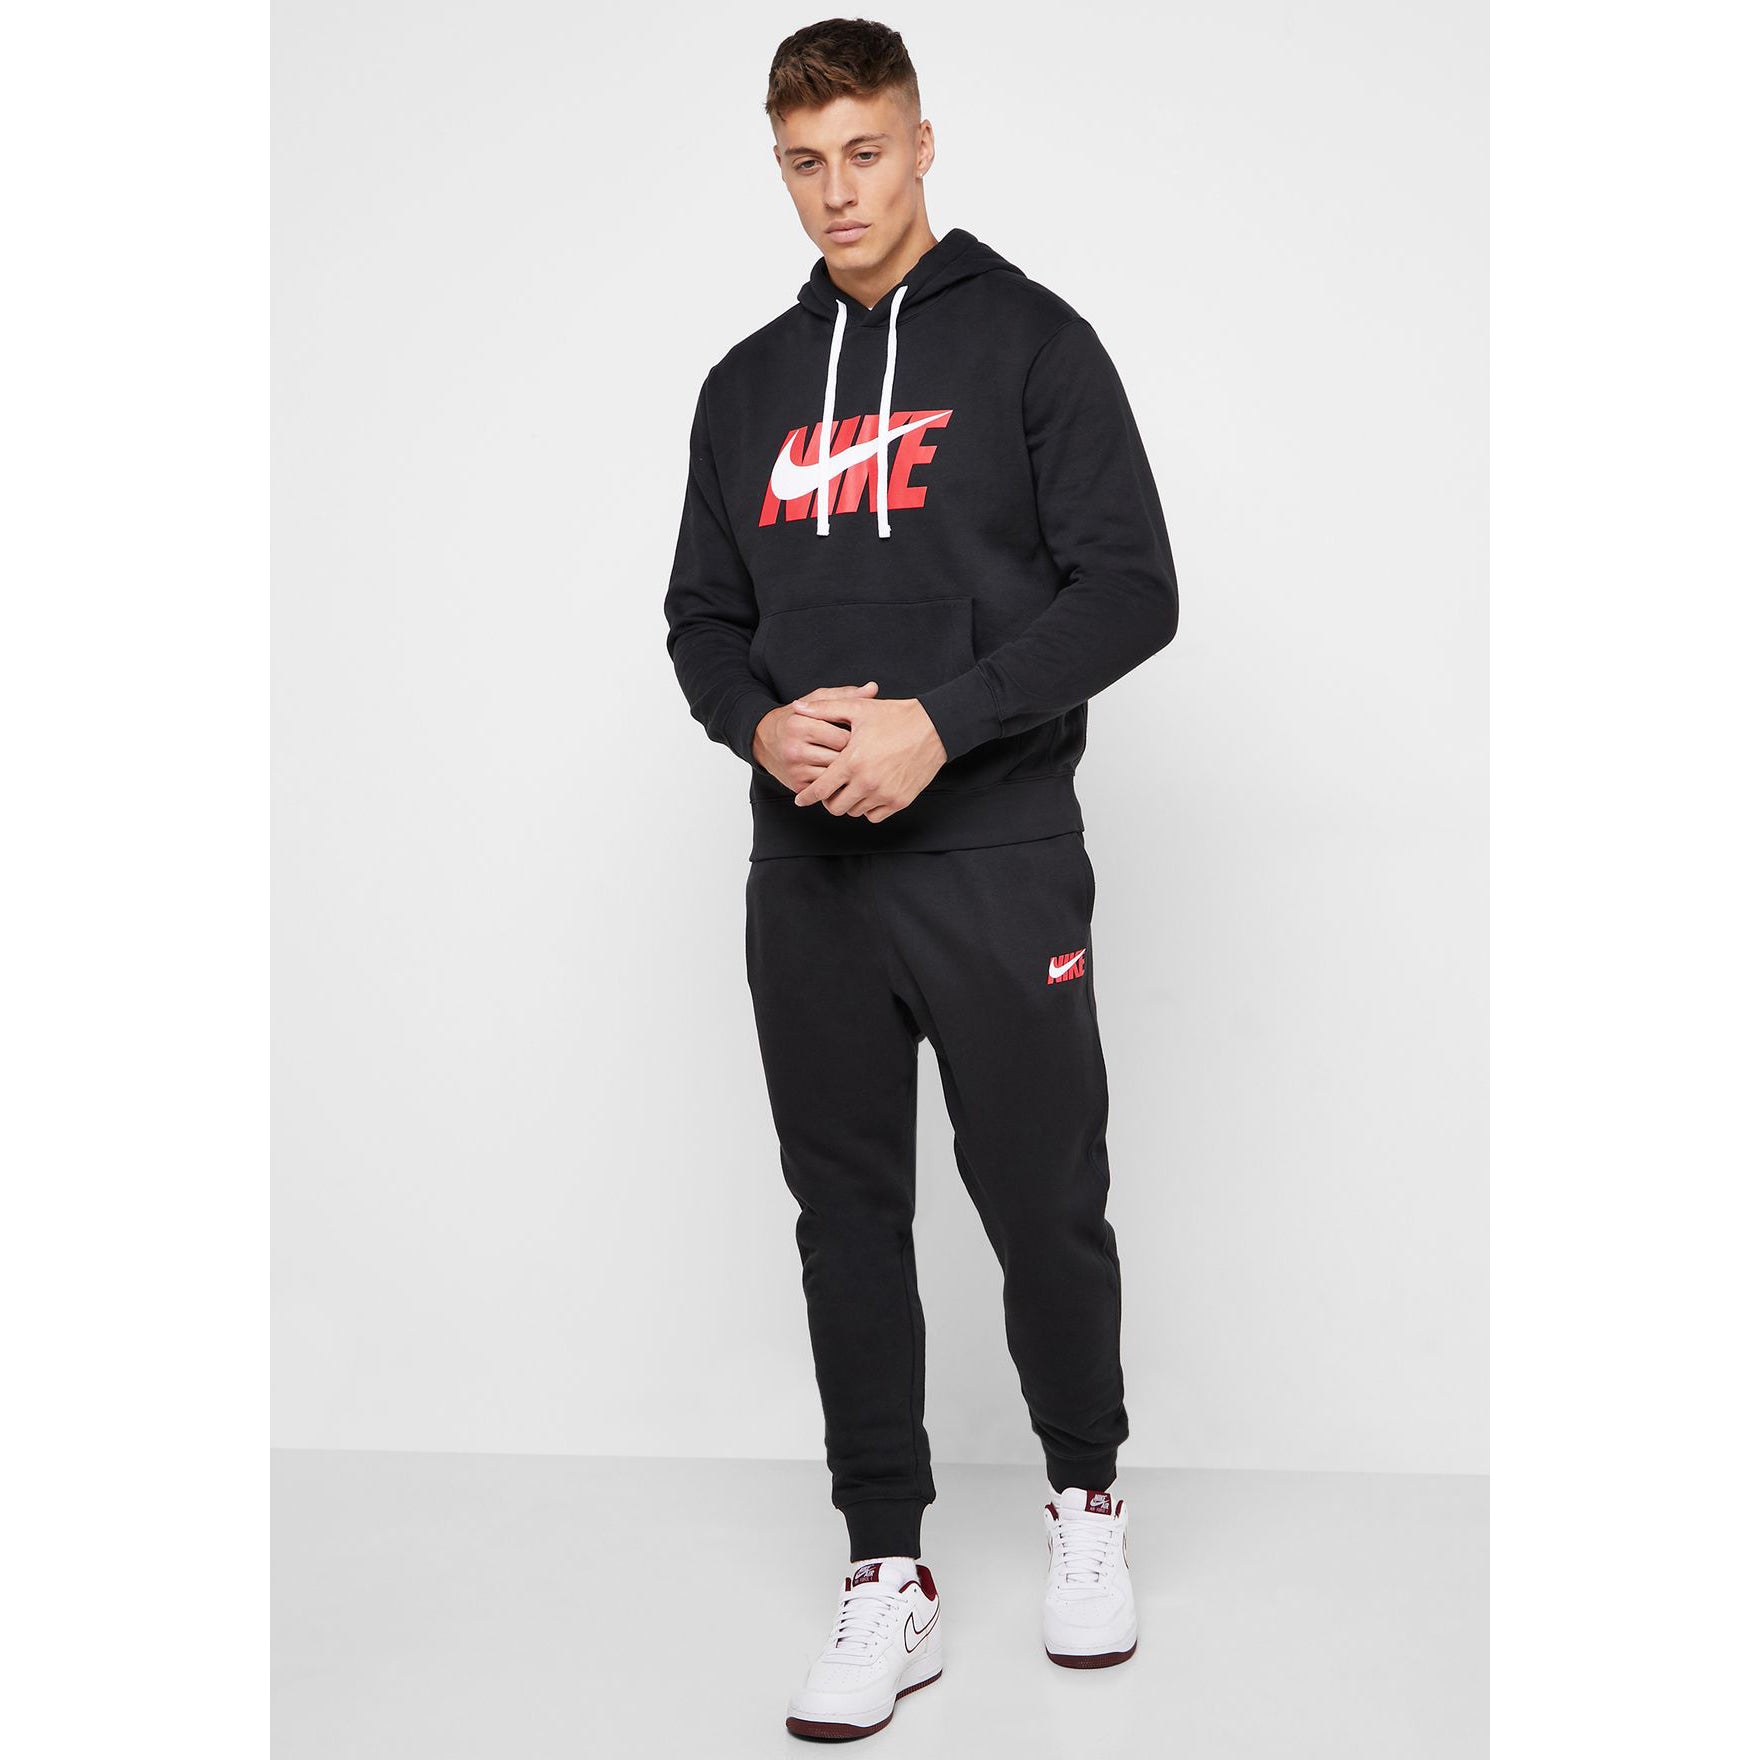 black and red nike tracksuit